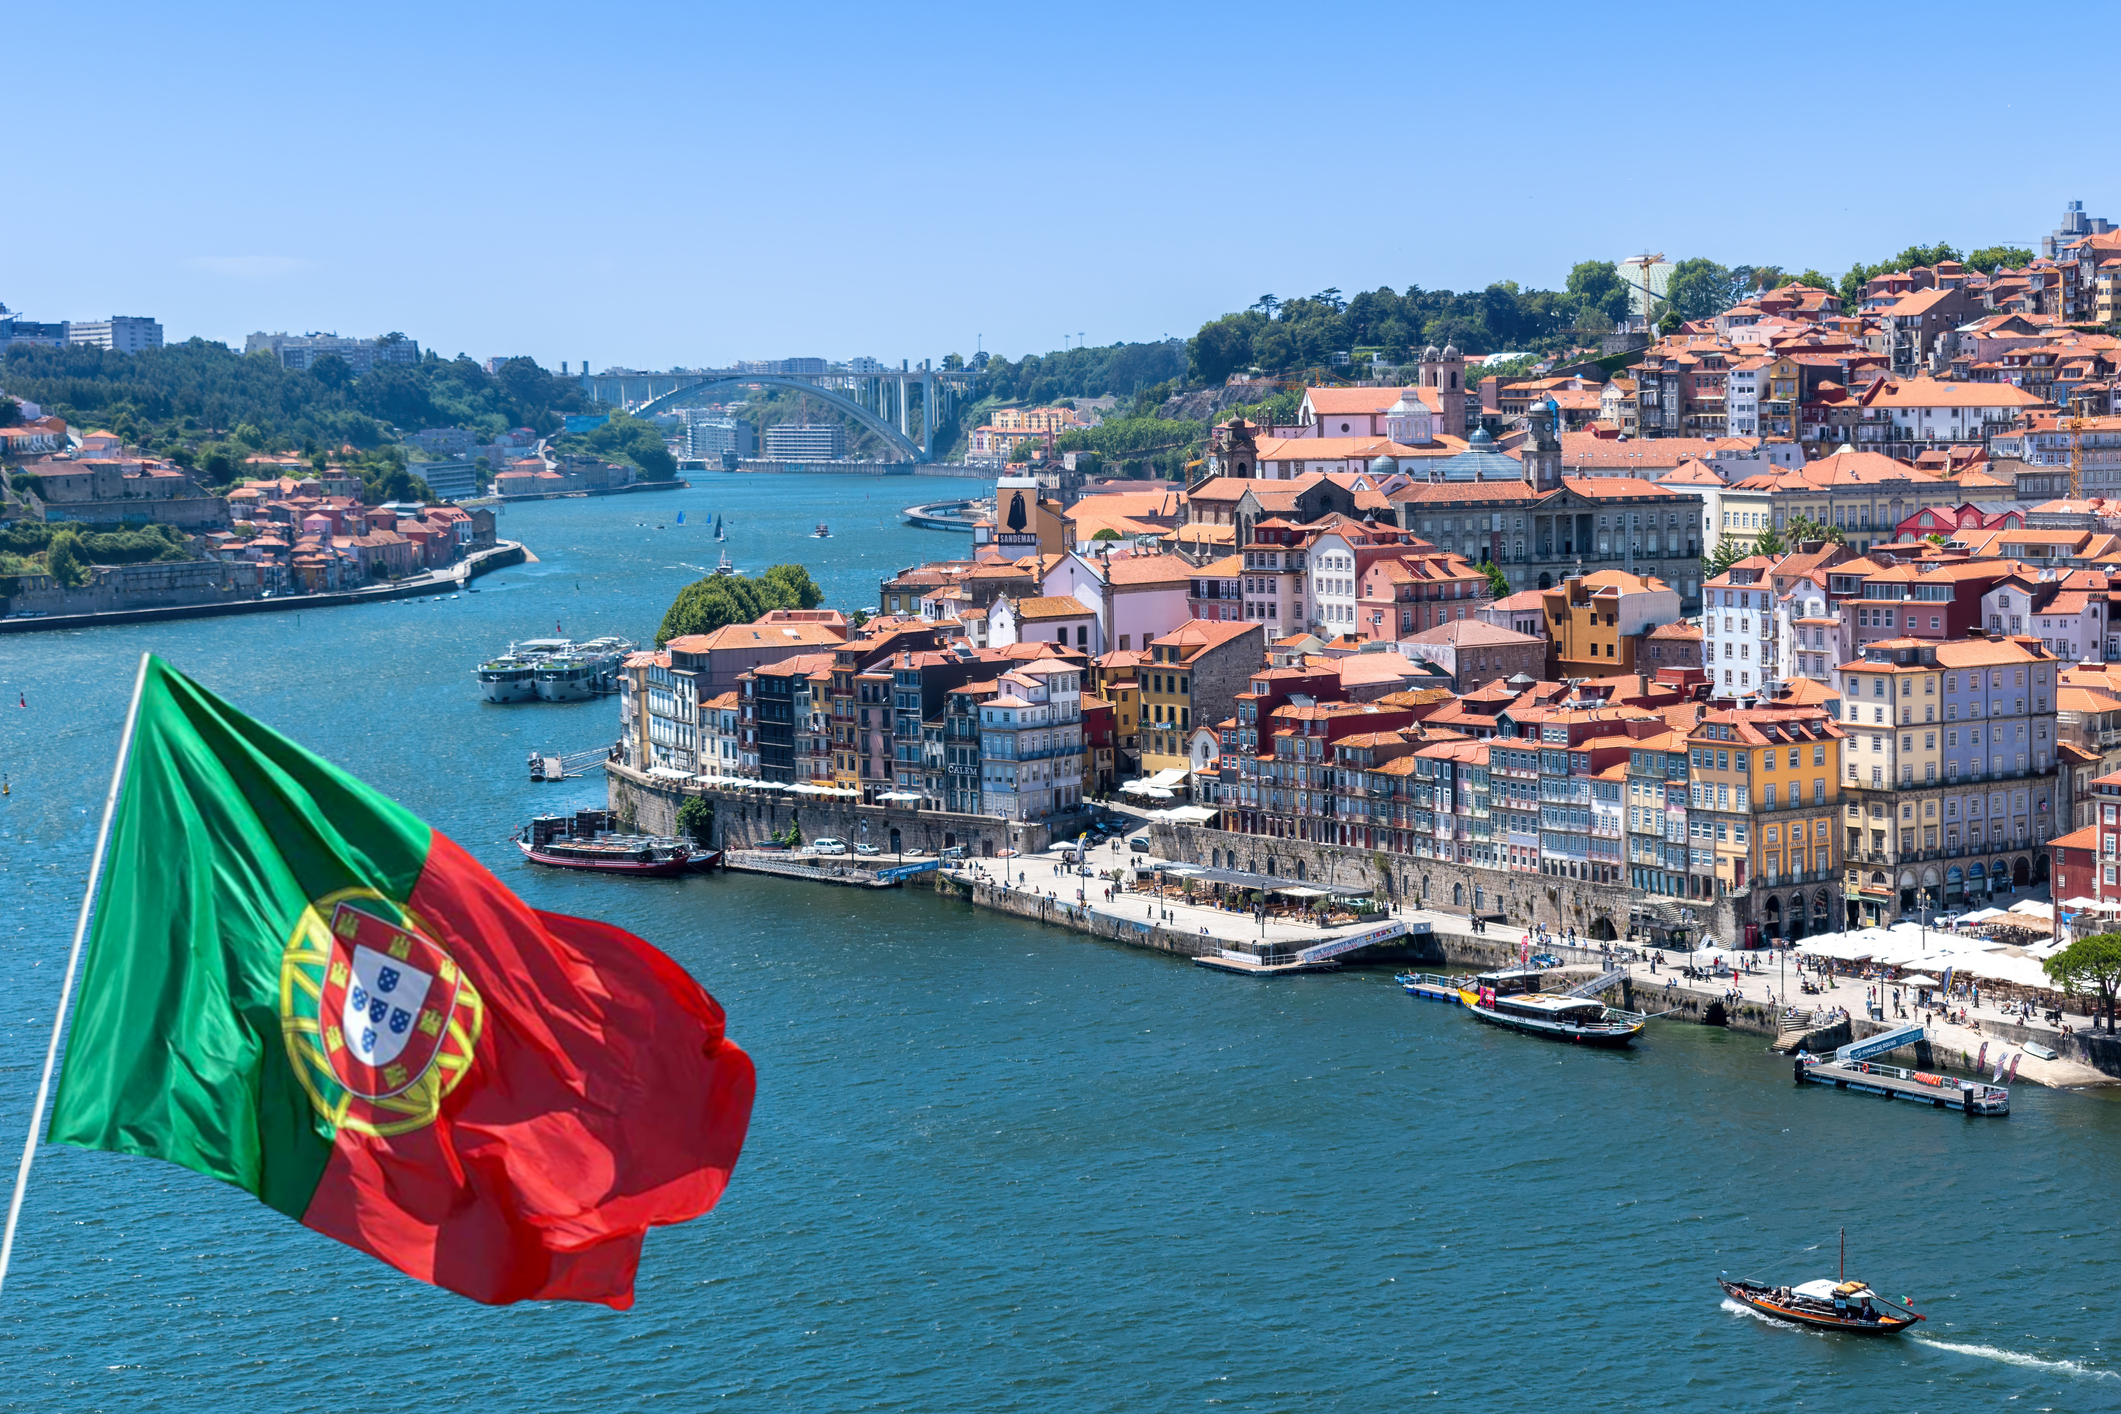 How Can We Spend More Than 90 Days in Portugal?